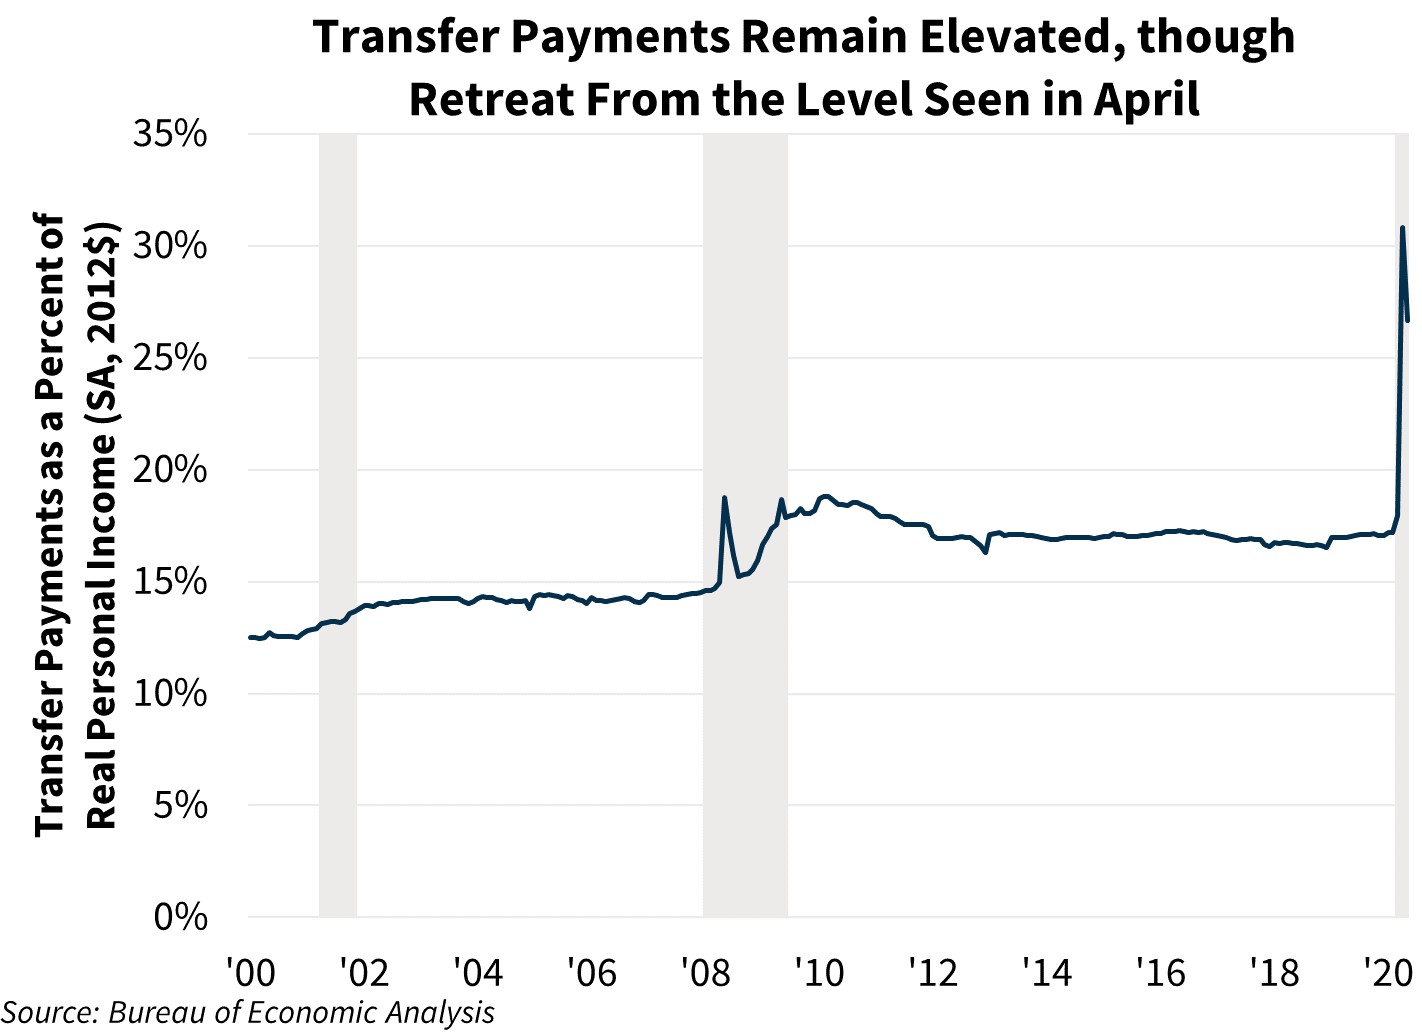 Transfer Payments Remain Elevated through Retreat From the Level Seen in April